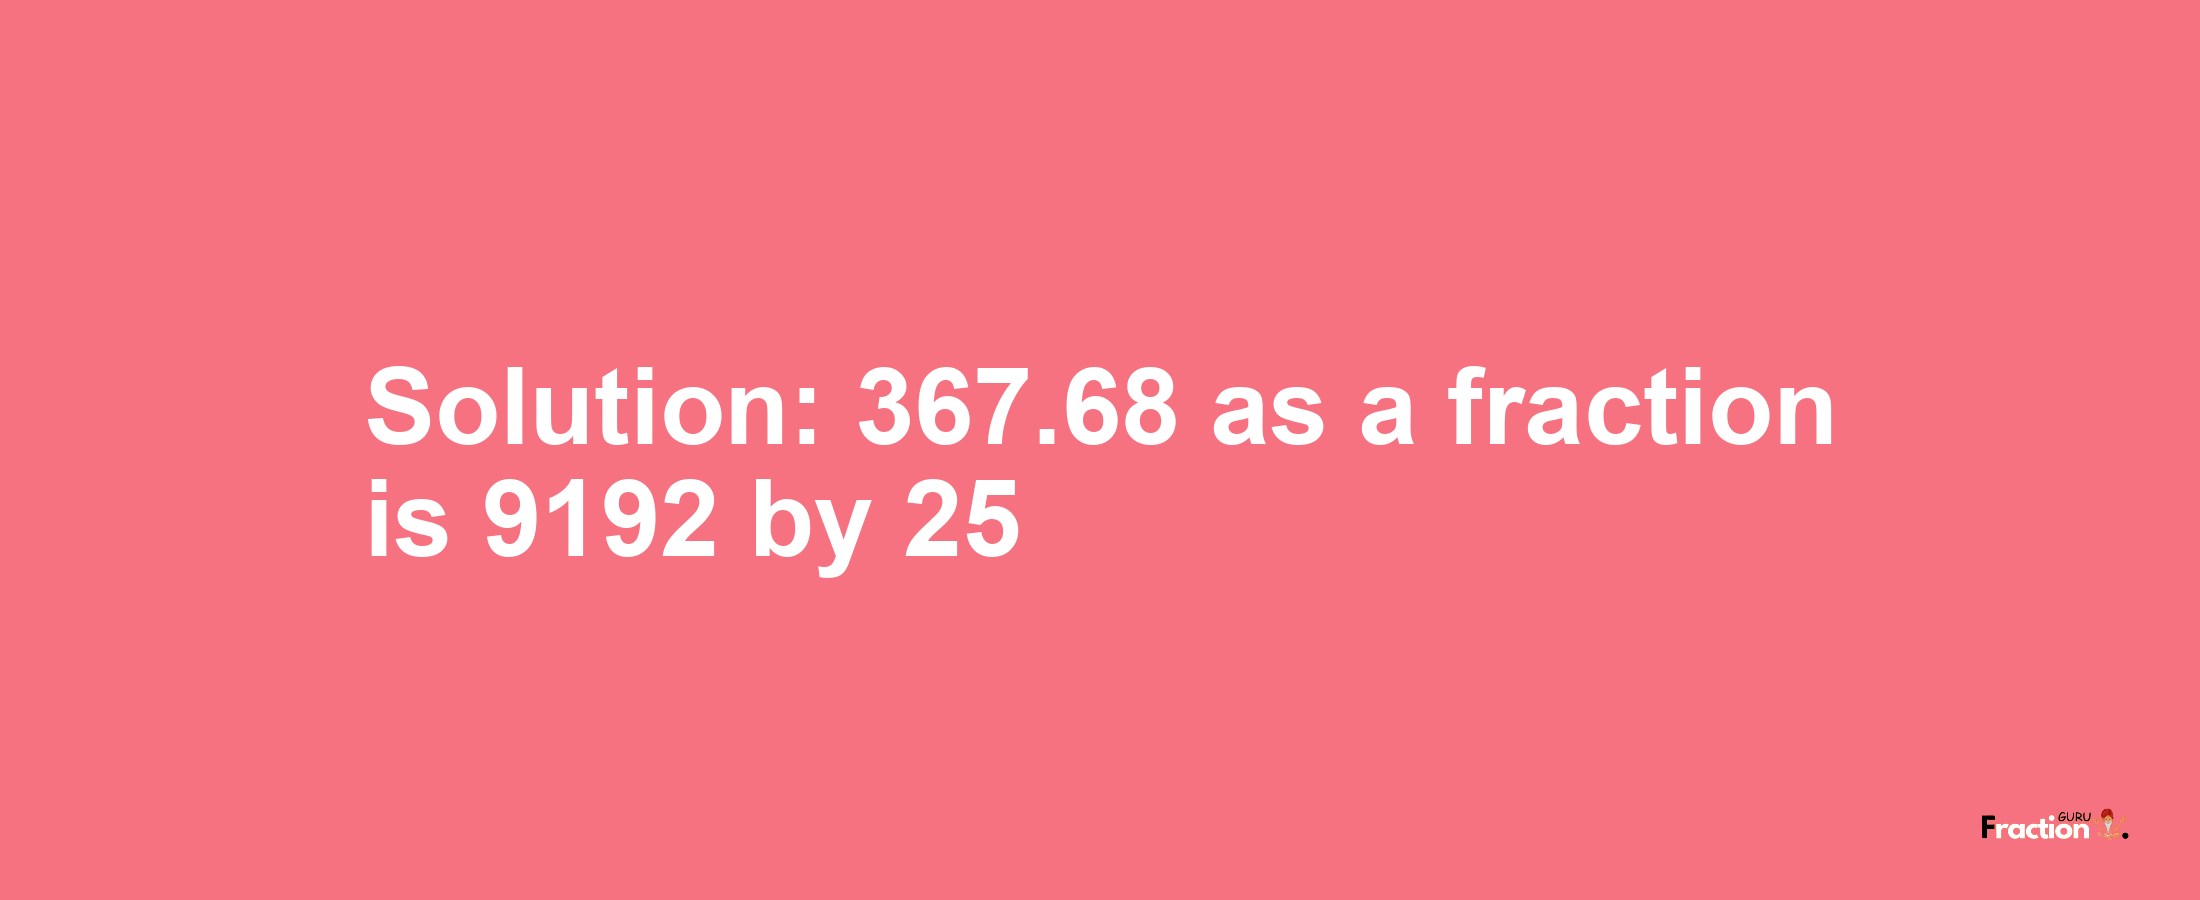 Solution:367.68 as a fraction is 9192/25